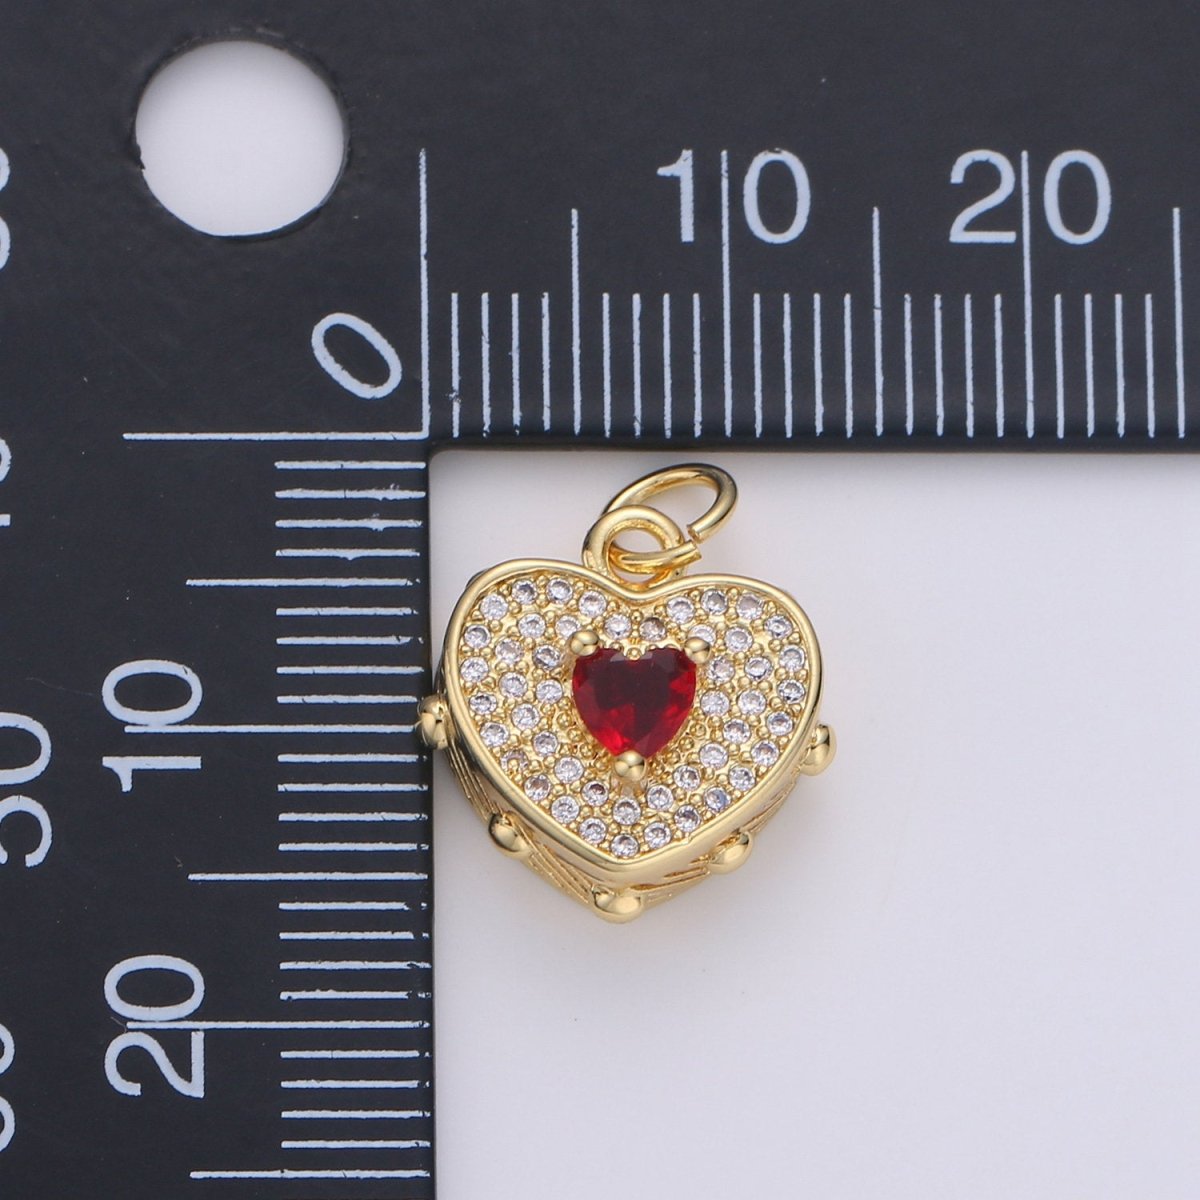 Dainty Gold Heart Pendant Necklace 24k Gold Filled Heart Charm Necklace Micro Pave Love, Heart Charm for Necklace Bracelet Earring Supply D-518 - DLUXCA